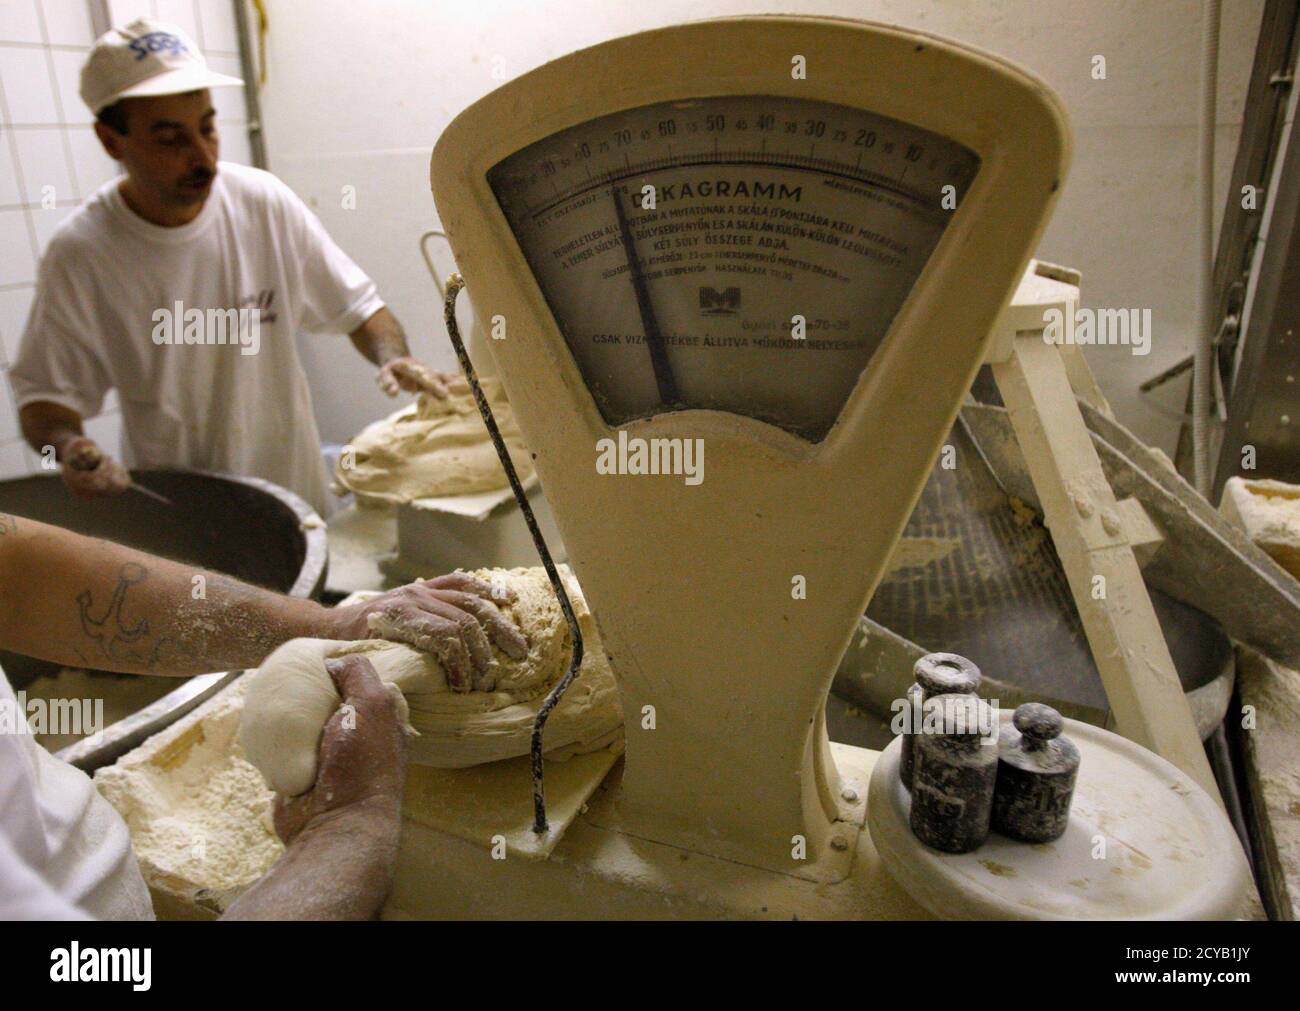 A Baker Weighs Dough In The Lipoti Bakery In Budapest November 3 2011 The Lipoti Bakery Started As A Small Family Venture In 1992 In Lipot Western Hungary And Grew Into A